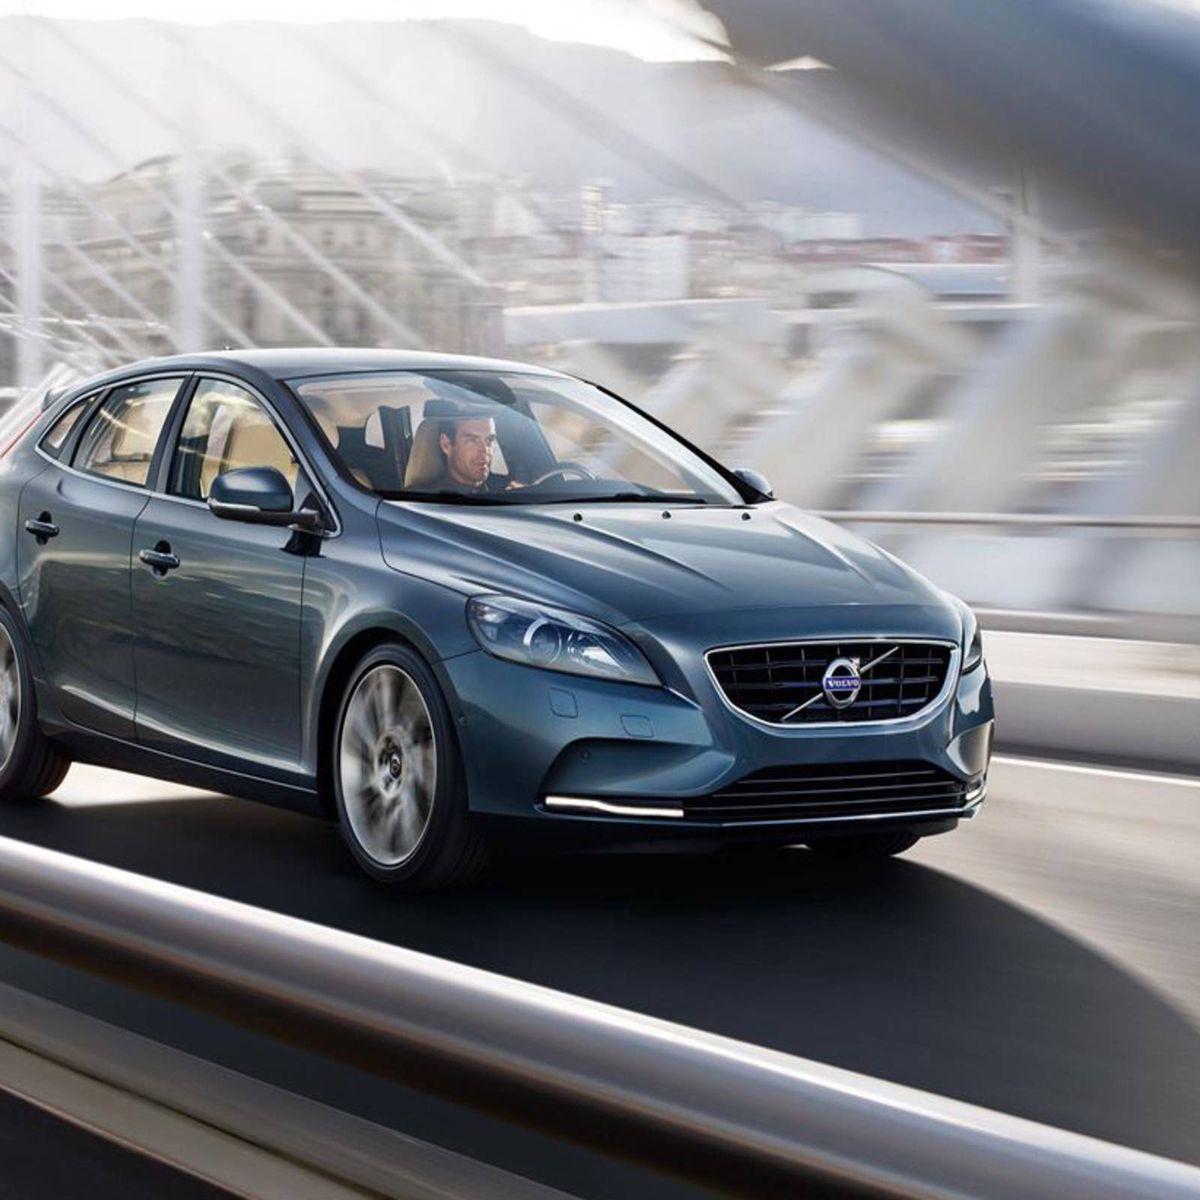 Imperialisme Tilskud Datter Reports: Volvo V40 hatch coming to the US in 2017